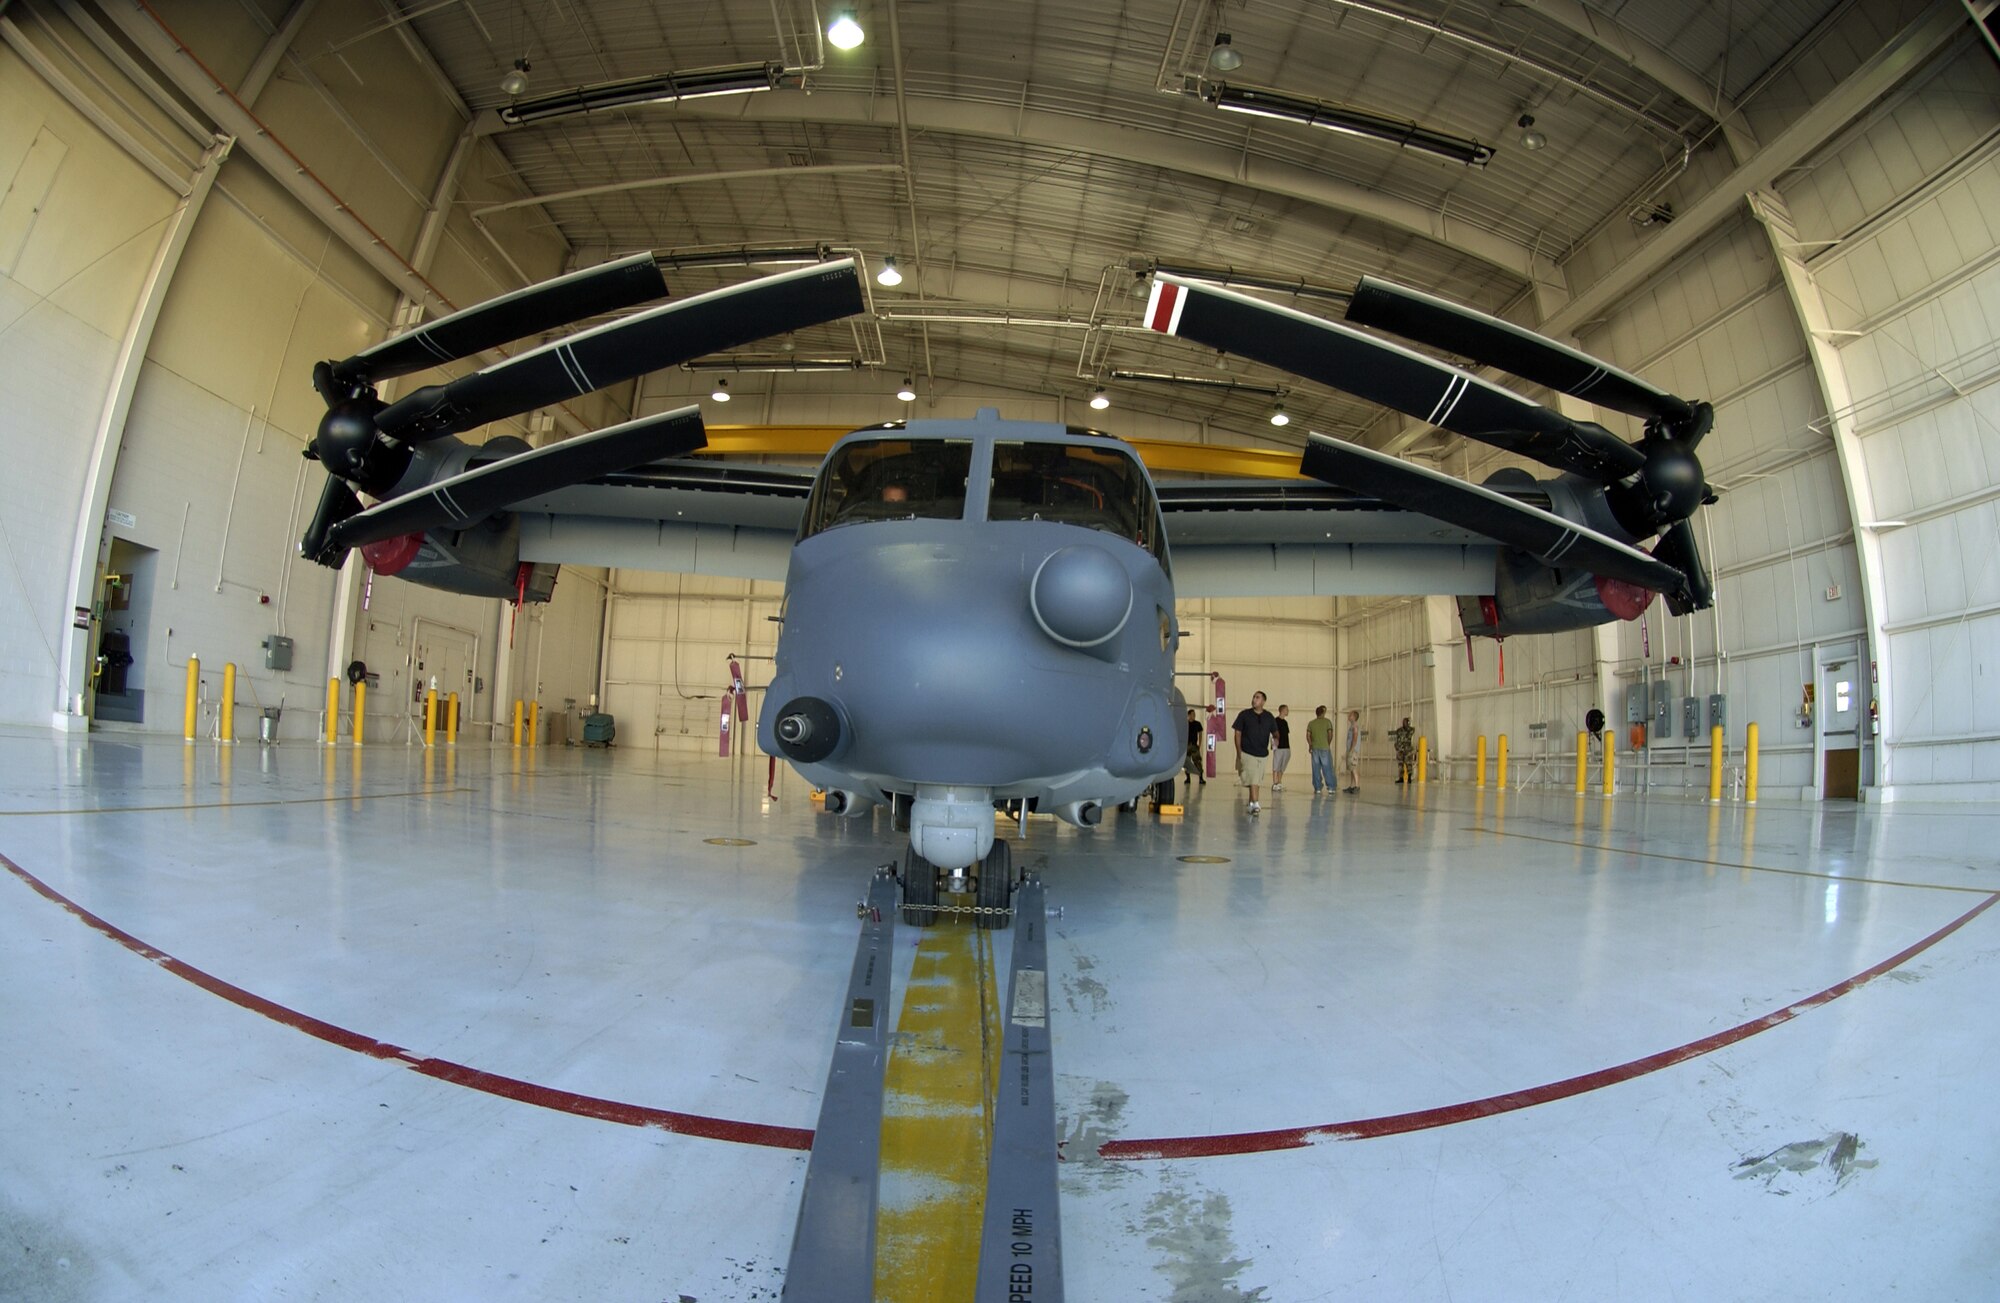 CANNON AIR FORCE BASE, N.M. -- A CV-22 Osprey with its rotors folded sits in a hangar at Cannon AFB, N.M., during a hangar clearance test on Sept. 25, 2007.  Cannon AFB will be transferred from Air Combat Command to Air Force Special Operations Command on Oct. 1.  Ospreys are among the special operations aircraft to be assigned to the 27th Special Operations Wing at Cannon.  (Air Force photo by Greg Allen)